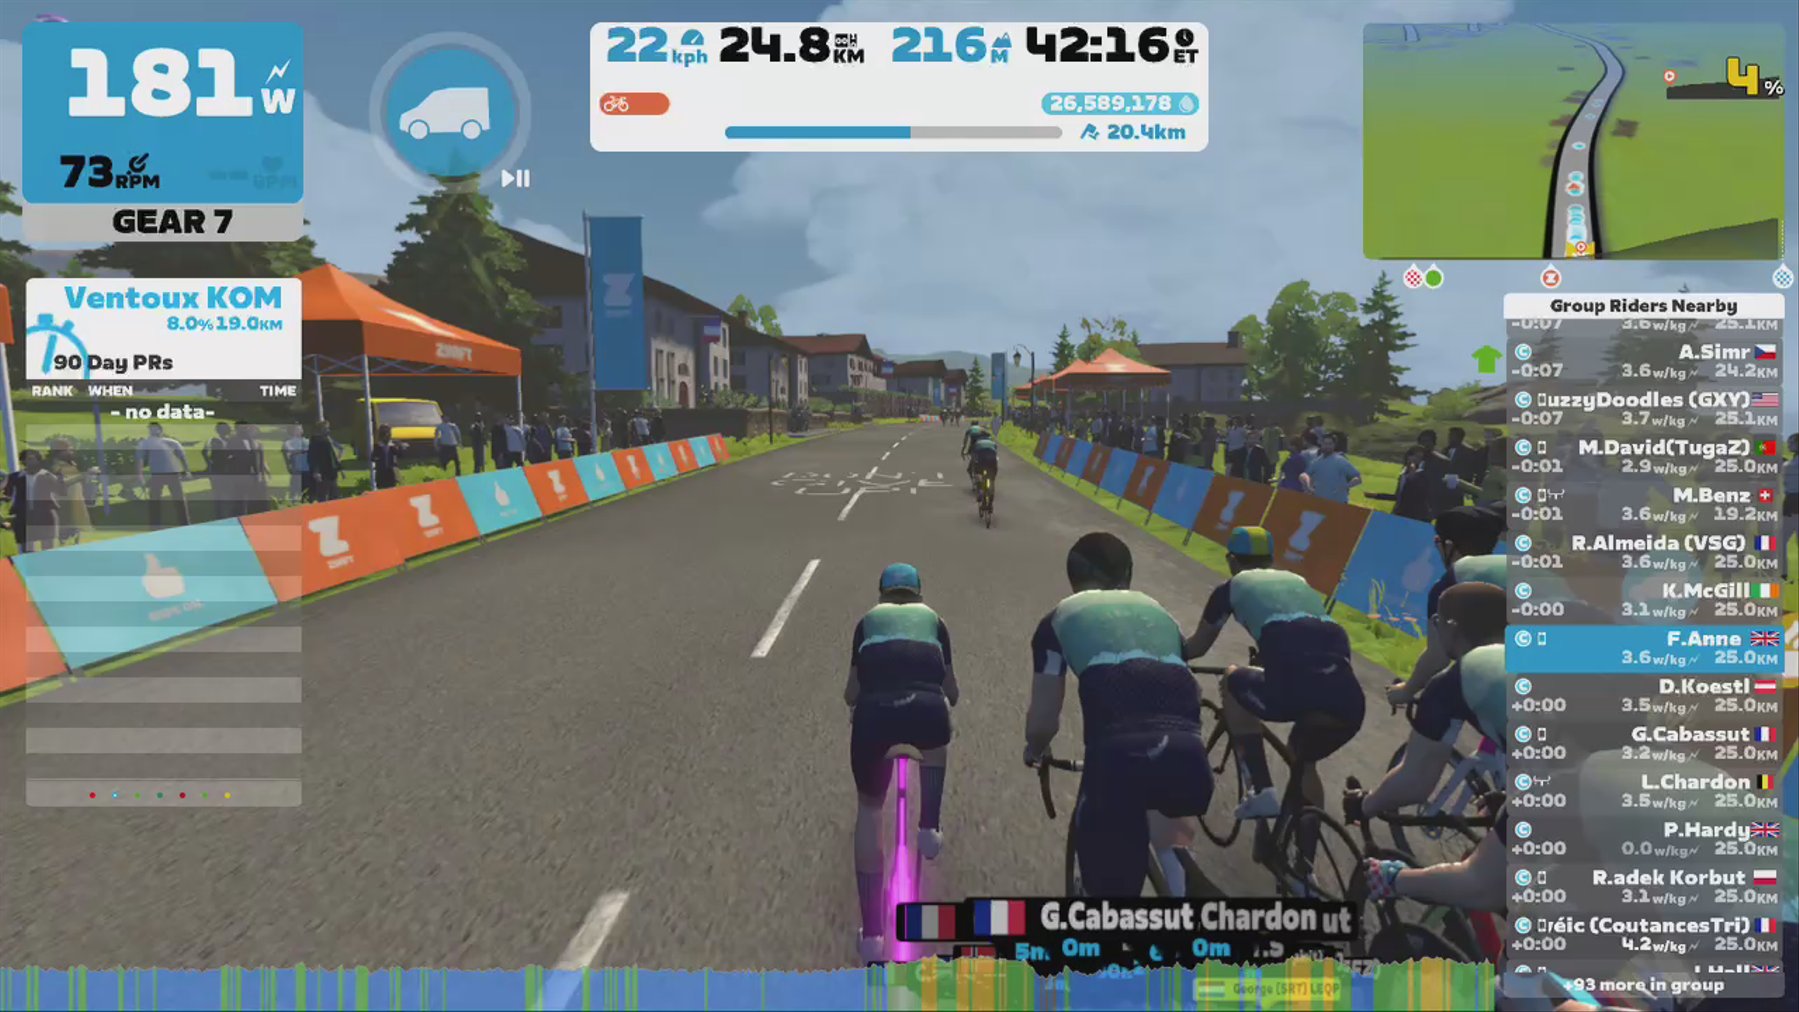 Zwift - Group Ride: LEQP Provence Rose Ride (C) on Roule Ma Poule in France